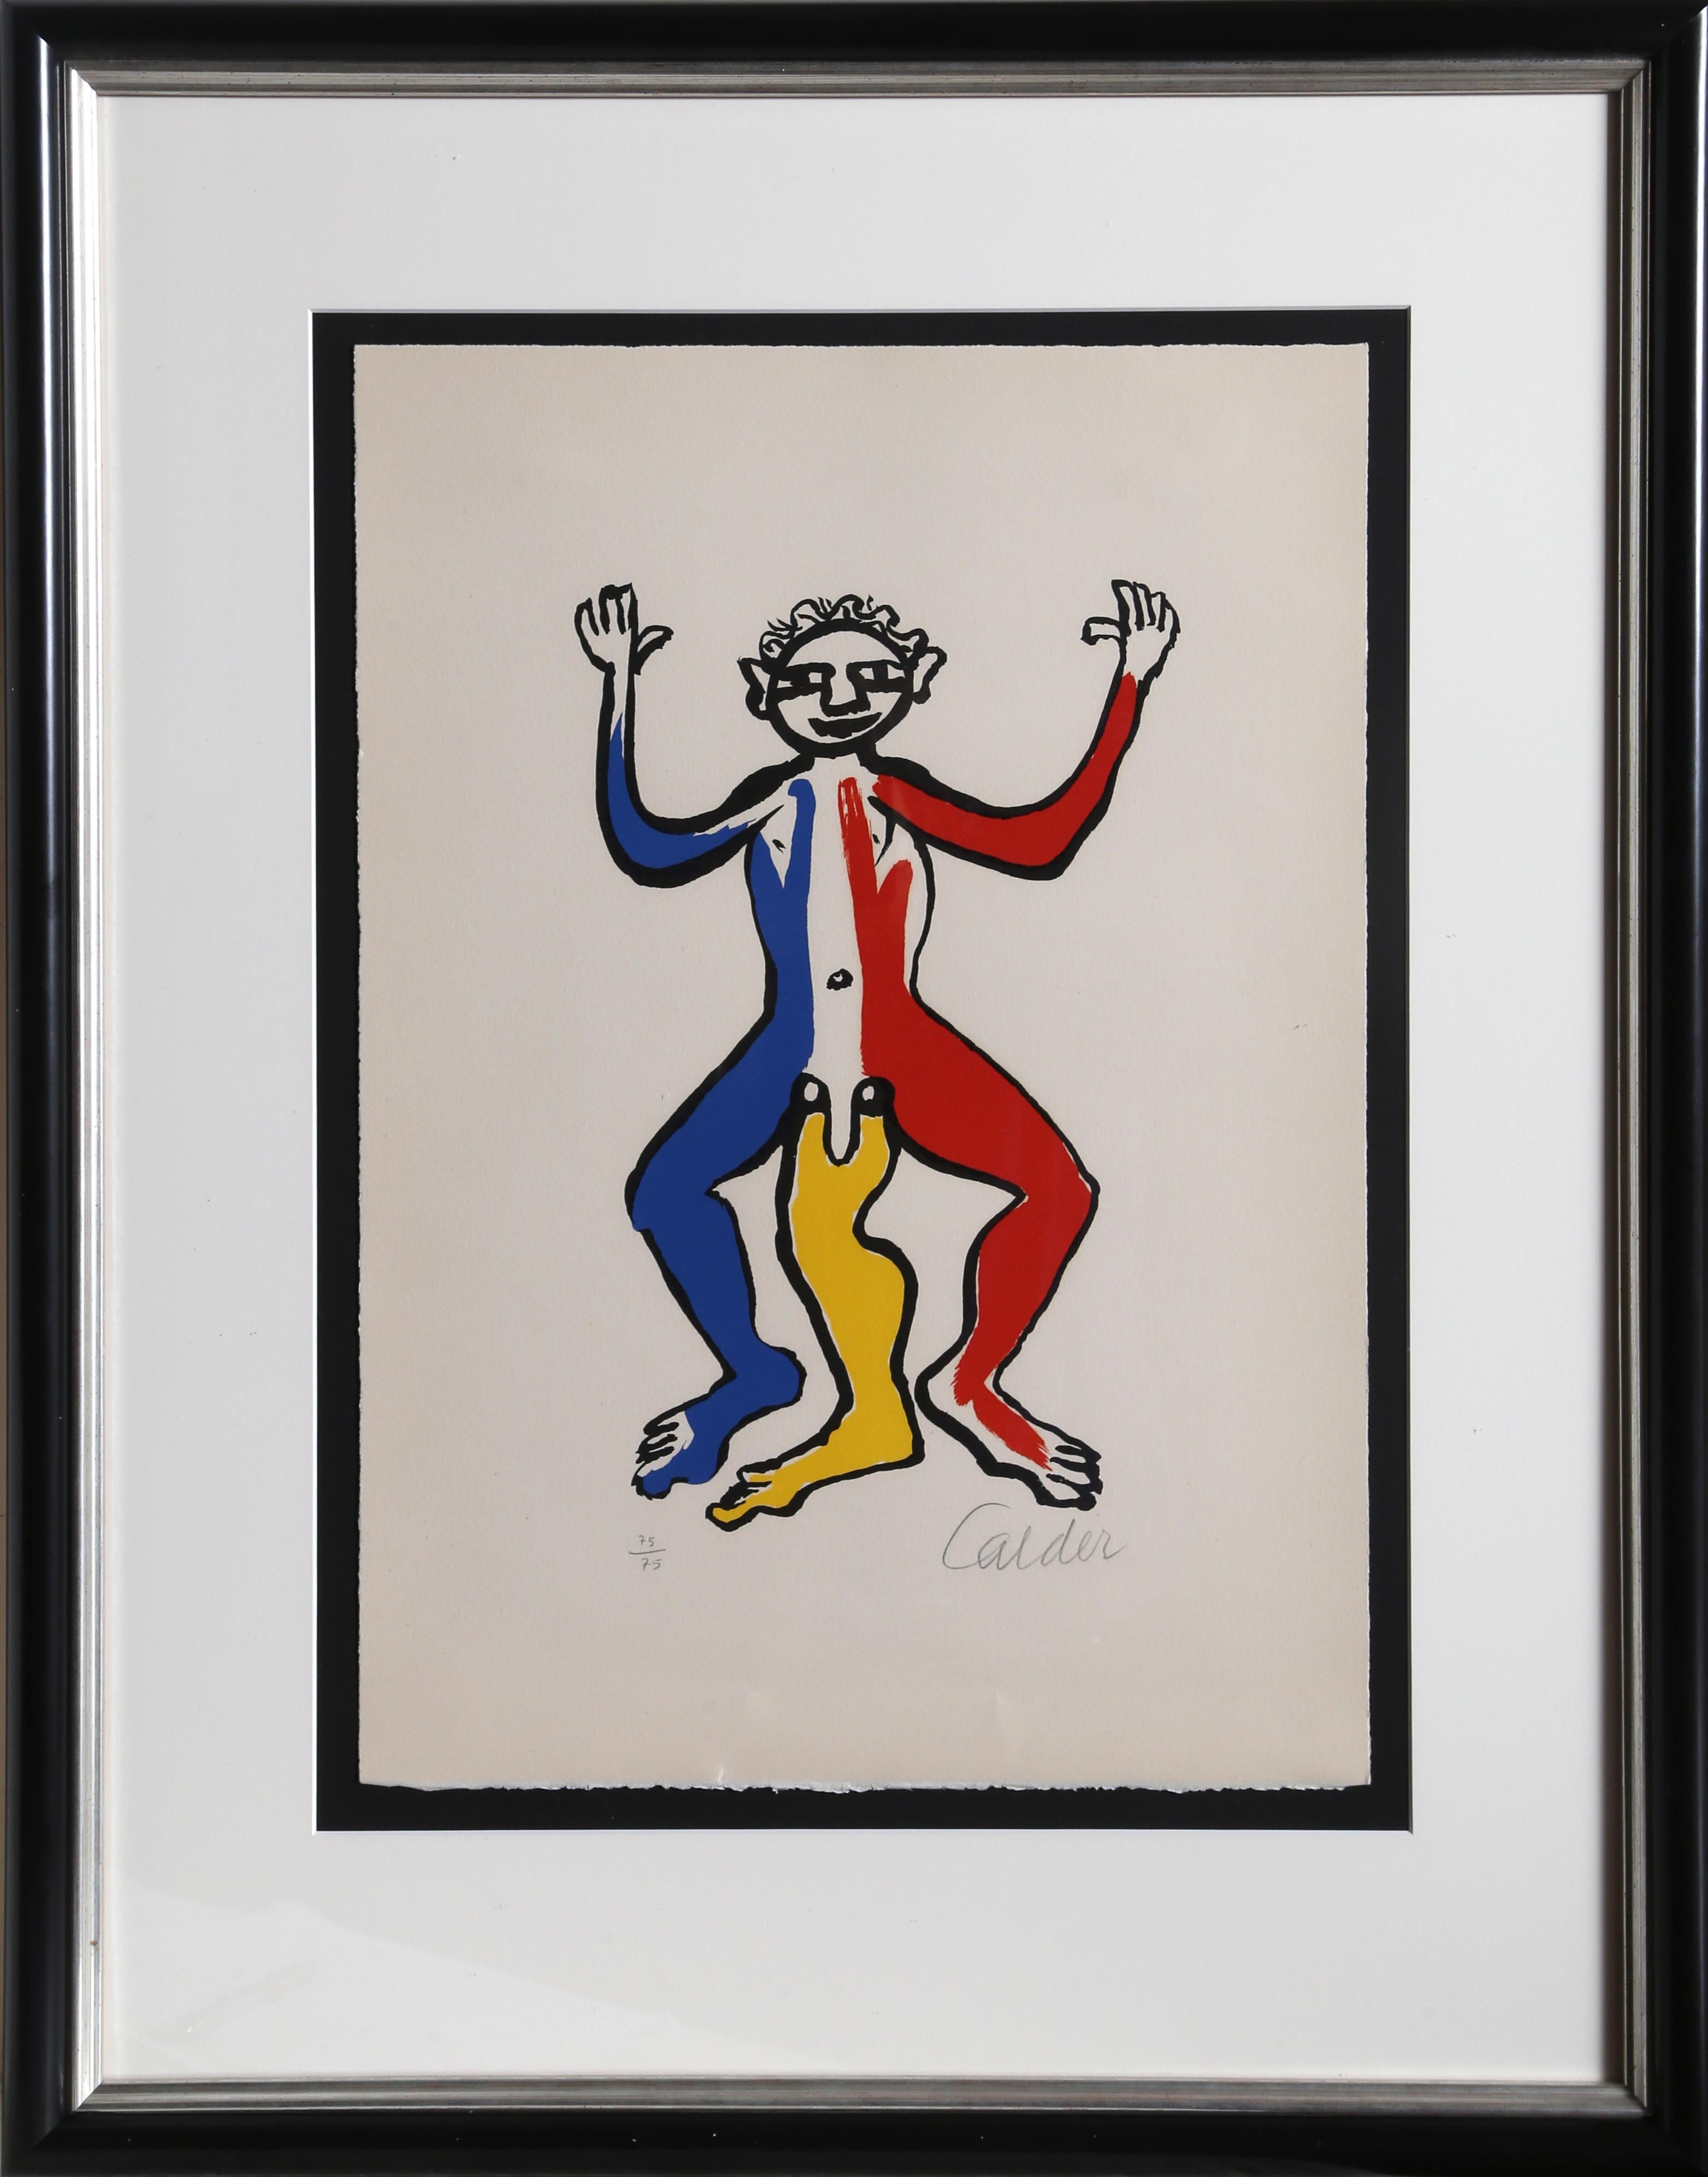 Artist: Alexander Calder, American (1898 - 1976)
Title: Acrobate from Derriere Le Miroir Deluxe Edition 212
Year: 1975
Medium: Lithograph, signed and numbered in pencil
Edition: 75/75
Image Size: 15 in. x 11 in. (38.1 cm x 27.94 cm)
Size: 21.75 x